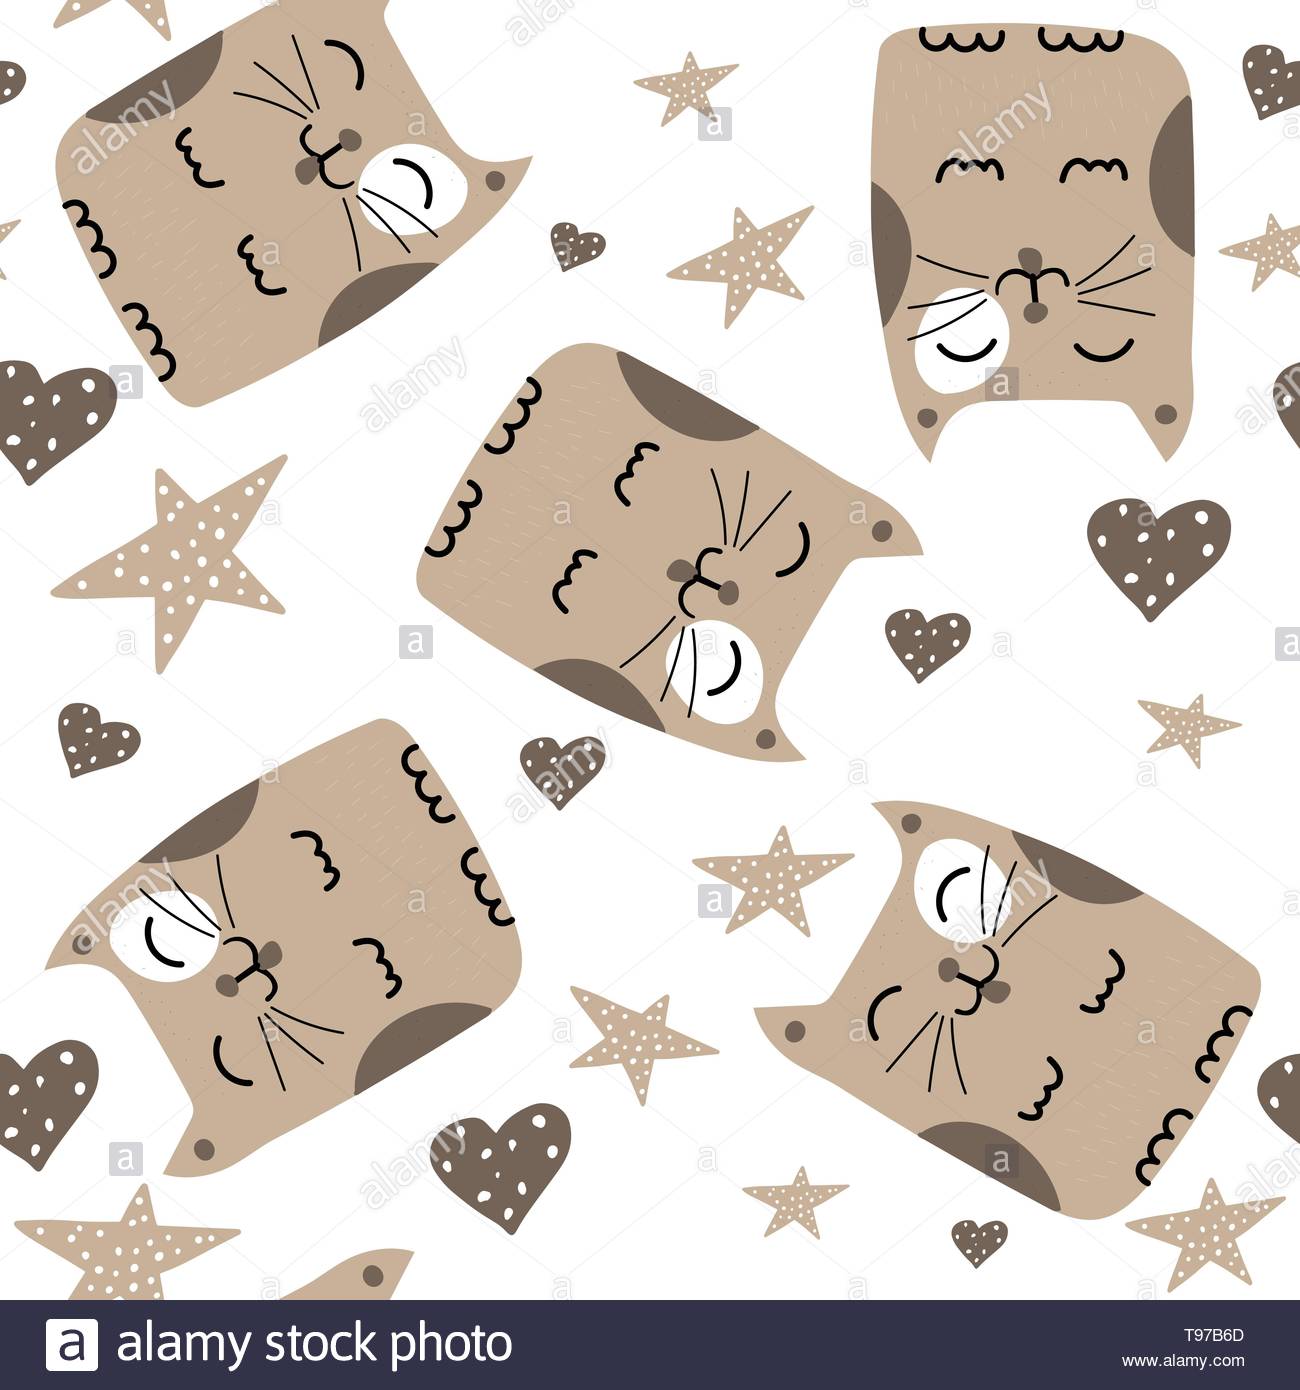 Childish Repeat Background With Cute Cats For Wrapping Paper